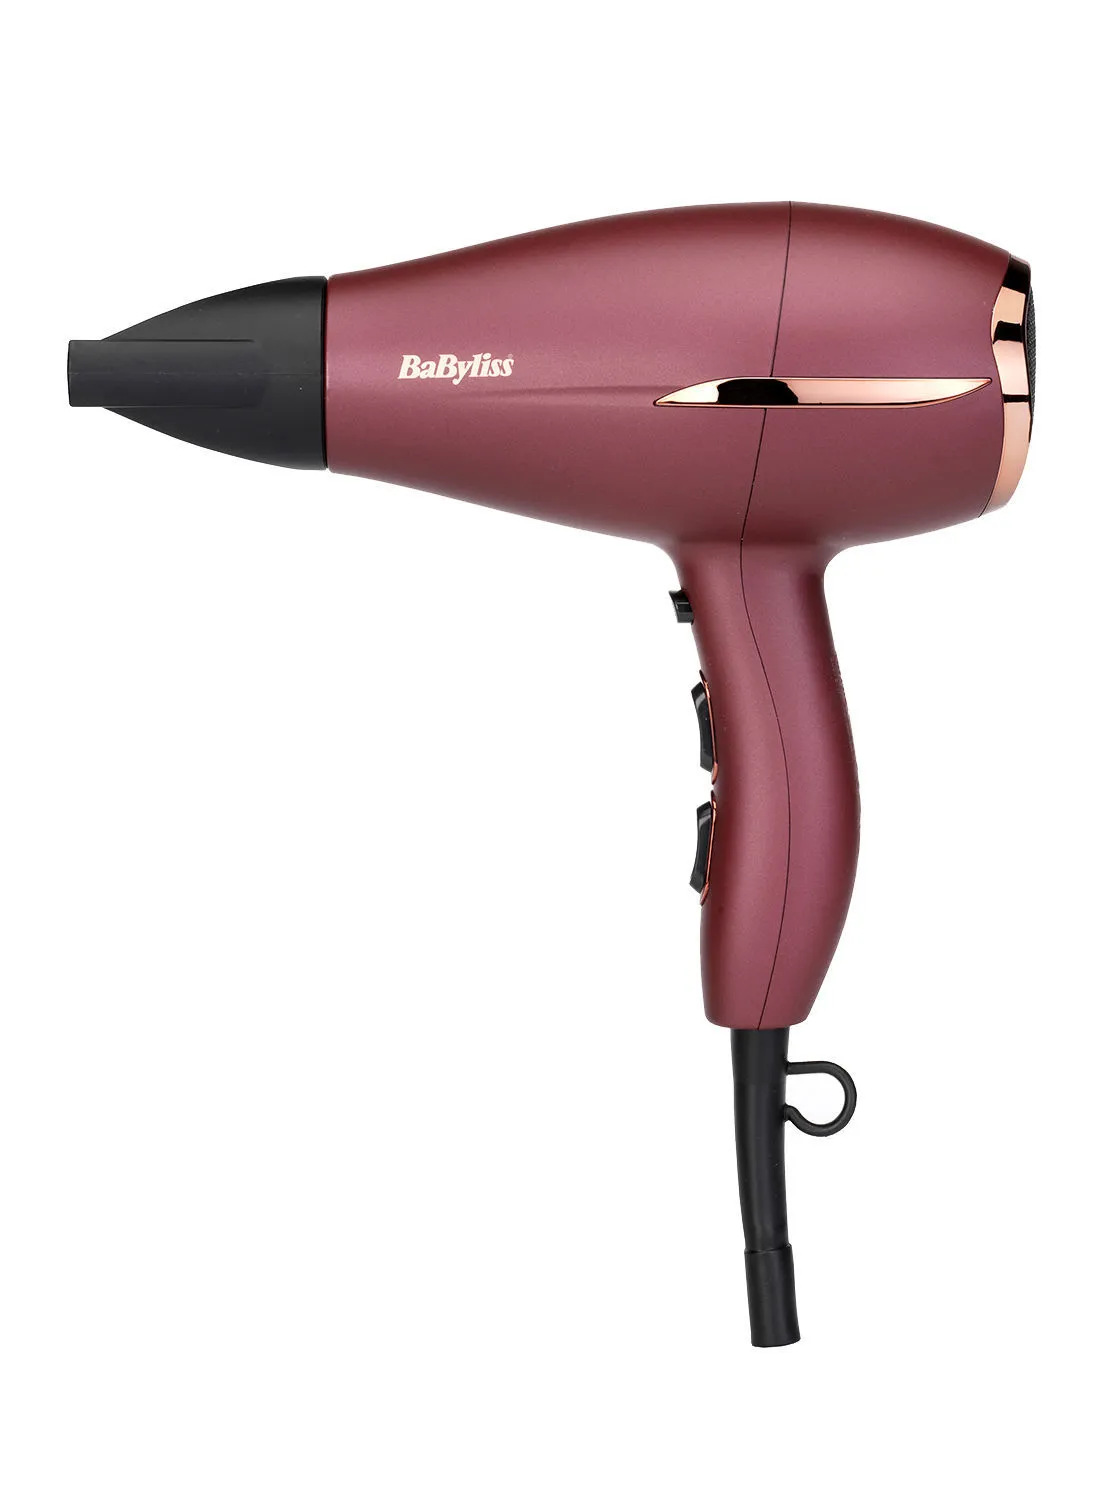 babyliss Hair Dryer Lightweight 2200W Smooth Ultra Fast Shine Boosting Power 3 Heat 2 Speed Settings With Cool Shot Berry Crush 5753PSDE